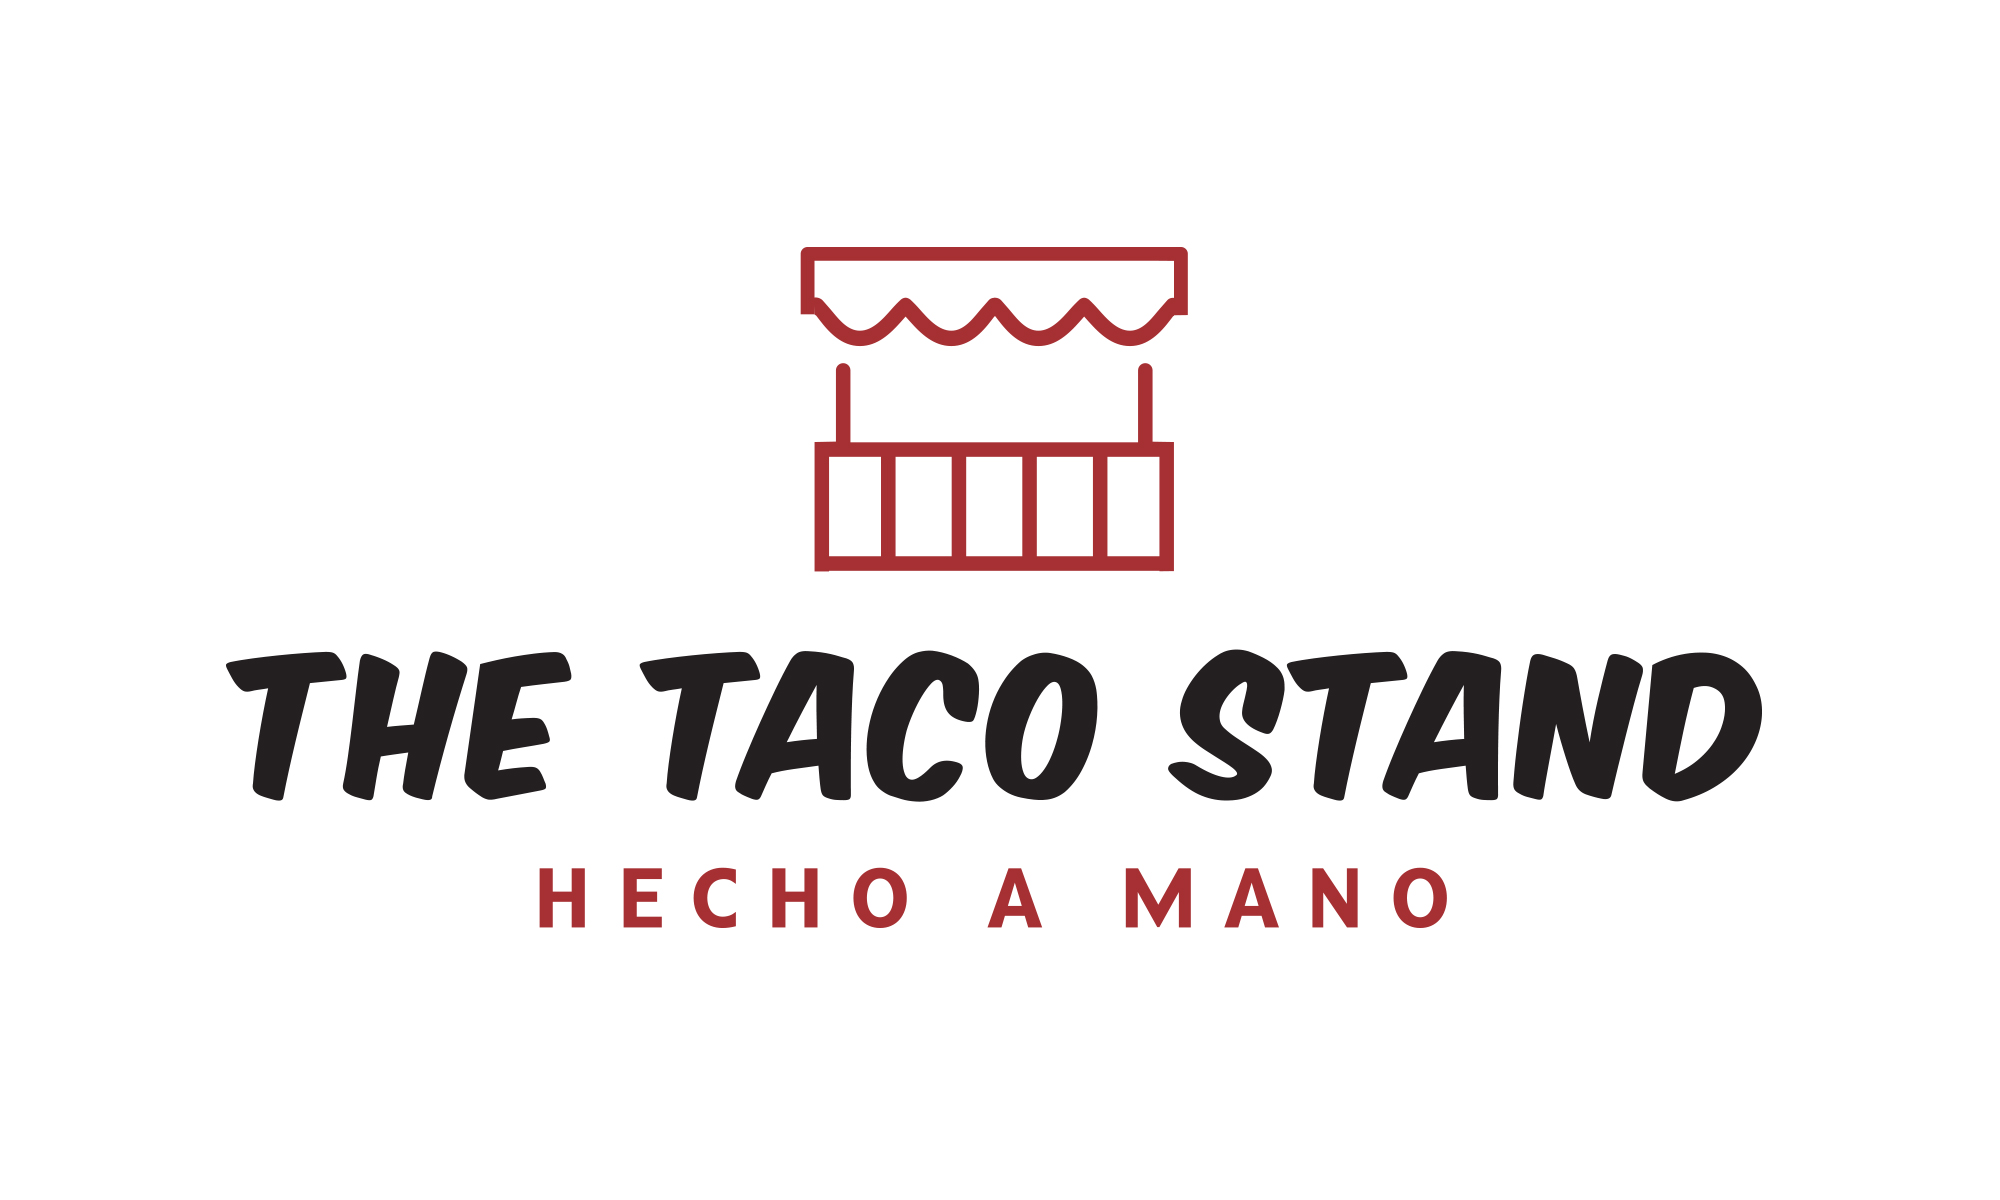 The Taco Stand logo